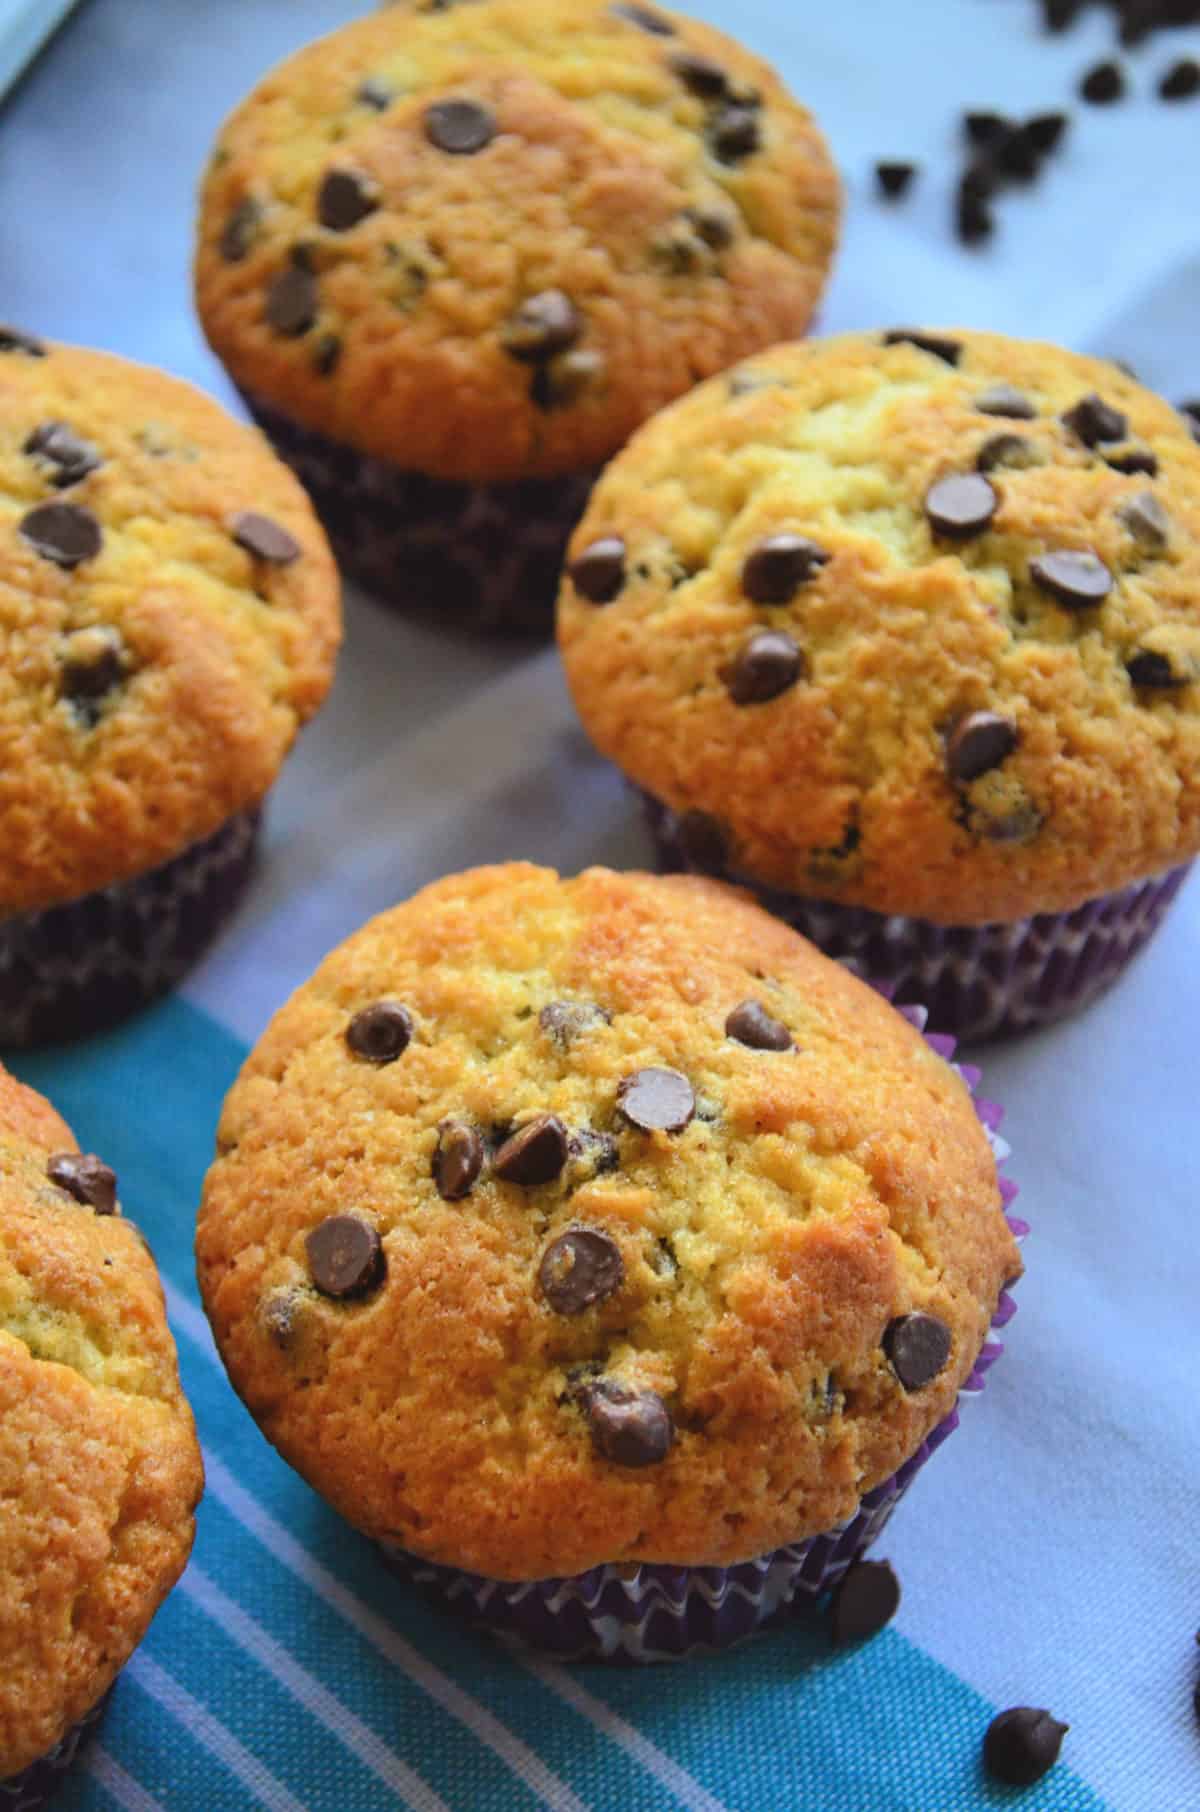 closeup of 3 golden brown chocolate chip muffins on blue striped cloth scattered with chocolate chips.